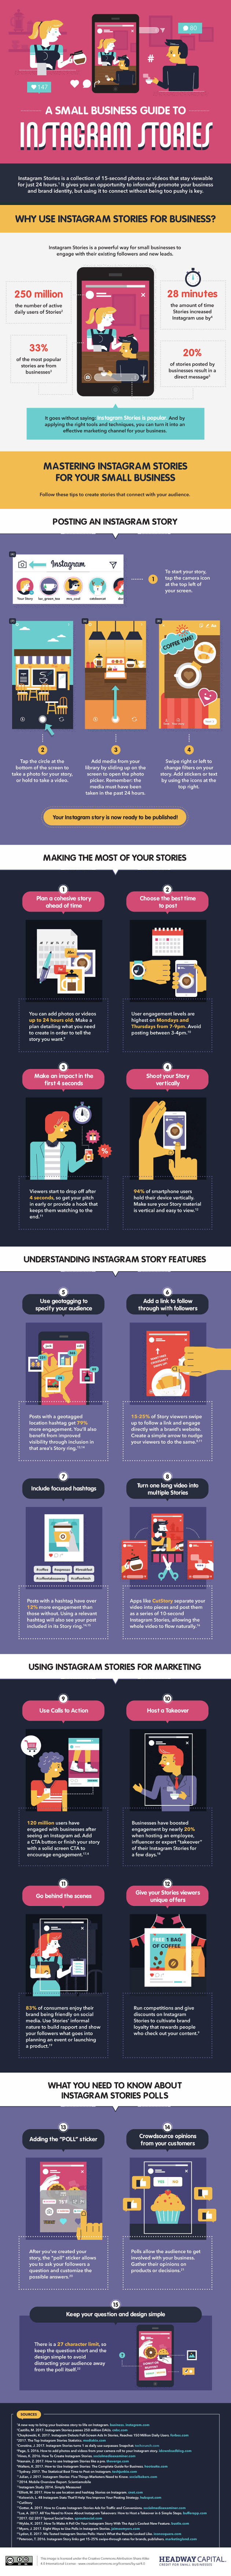 infographie-small-business-guide-to-instagram-stories